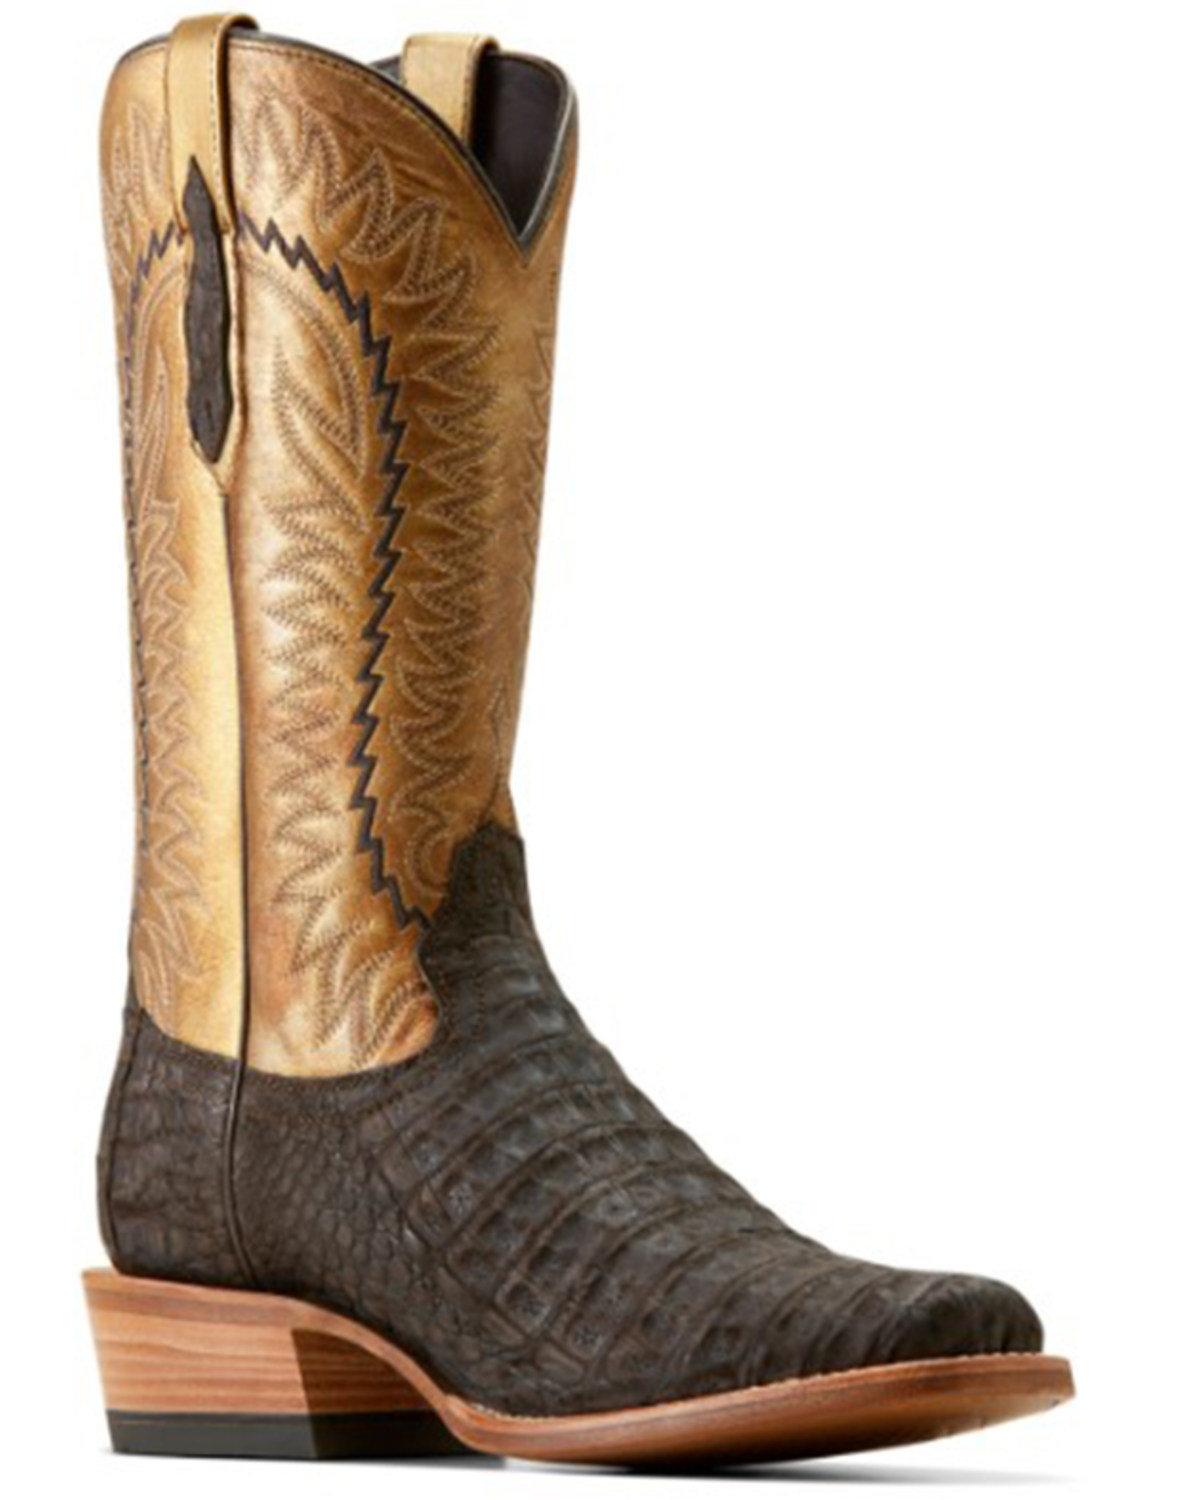 Ariat Men's Futurity Finalist Exotic Caiman Western Boots - Square Toe